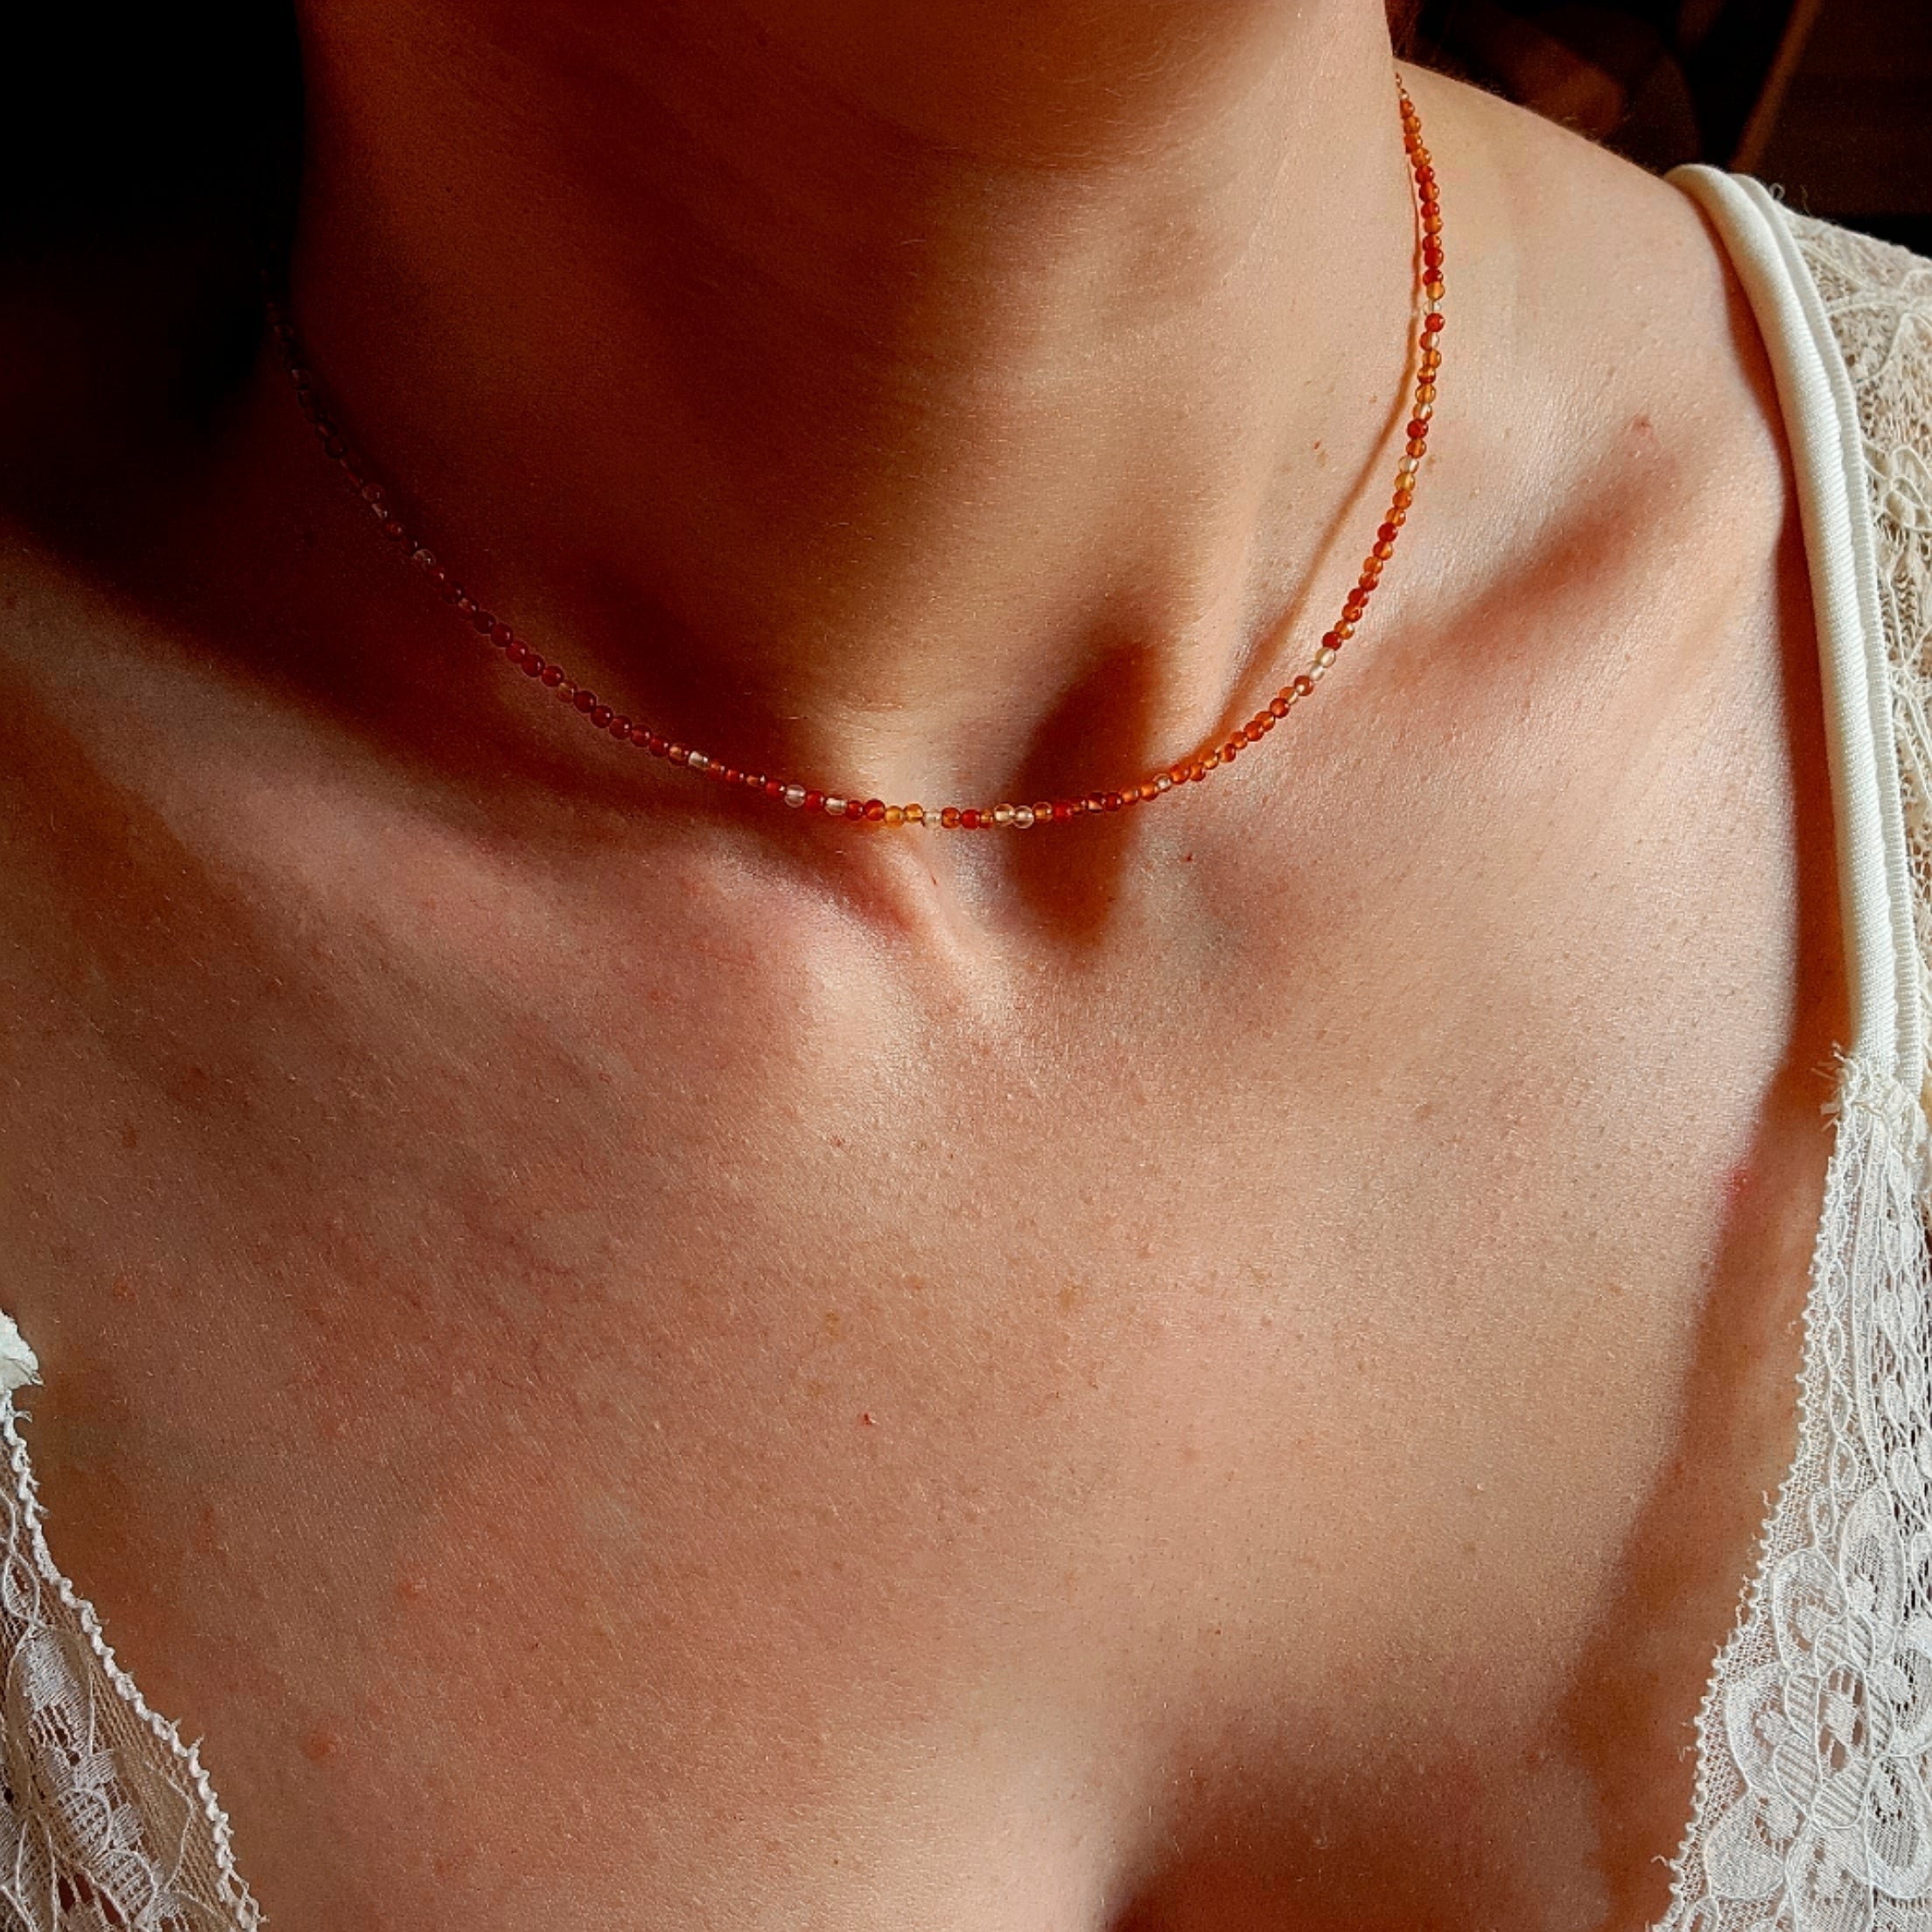 Fiery Carnelian Micro Round Choker/Layering Necklace for Creativity and Passion